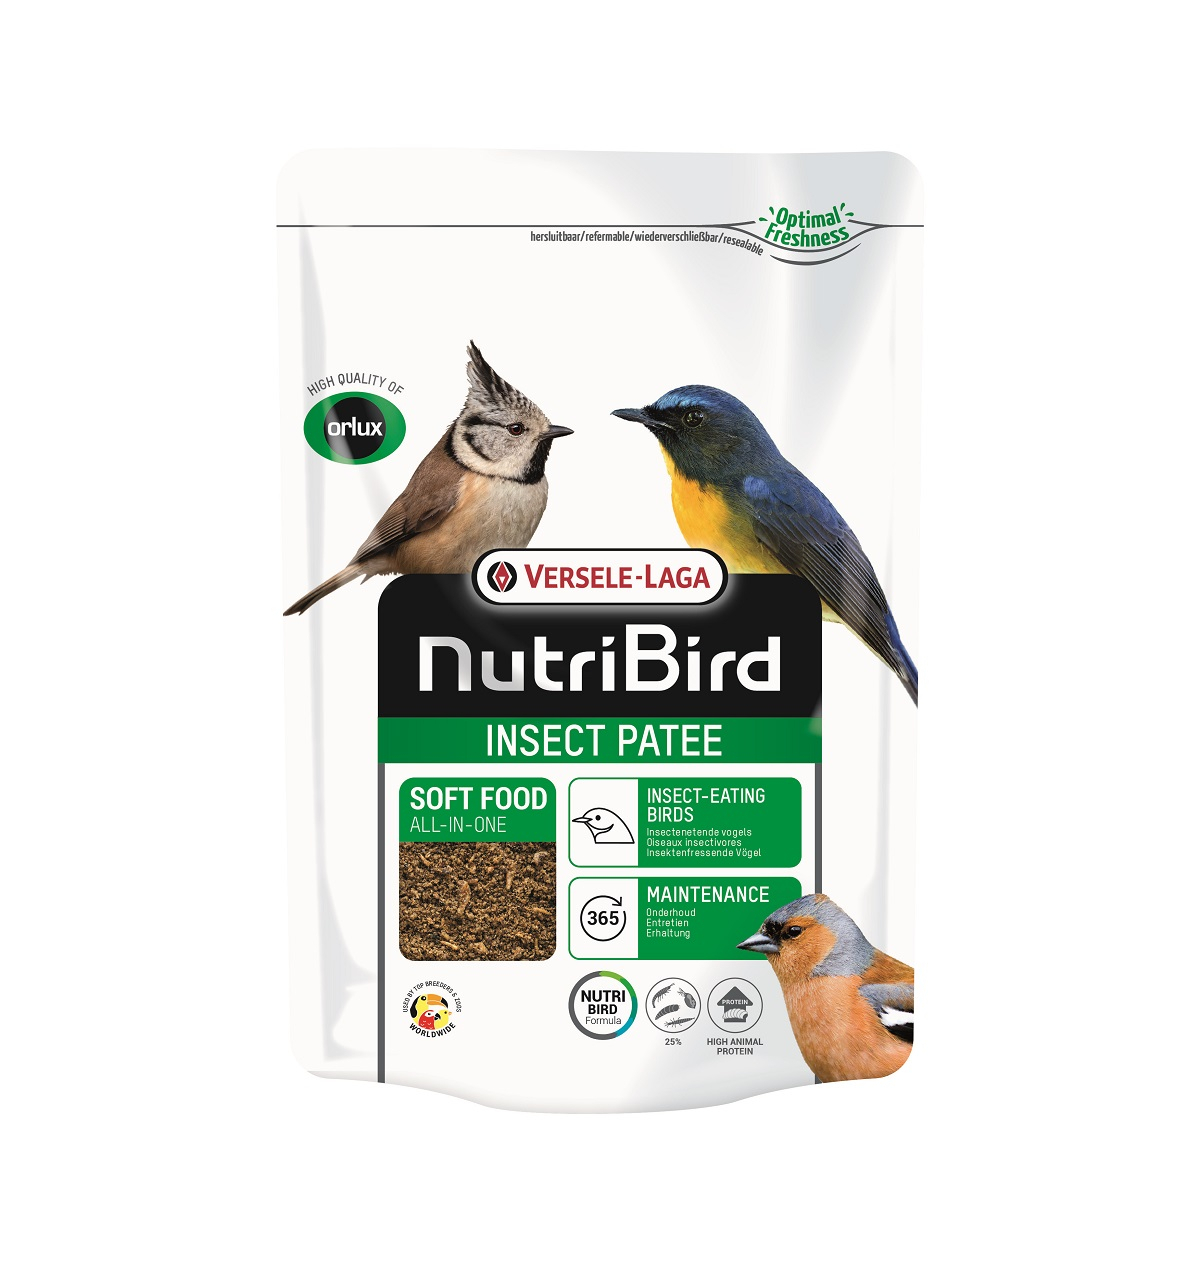 Nutribird Insect Patee - Pasta de insectos